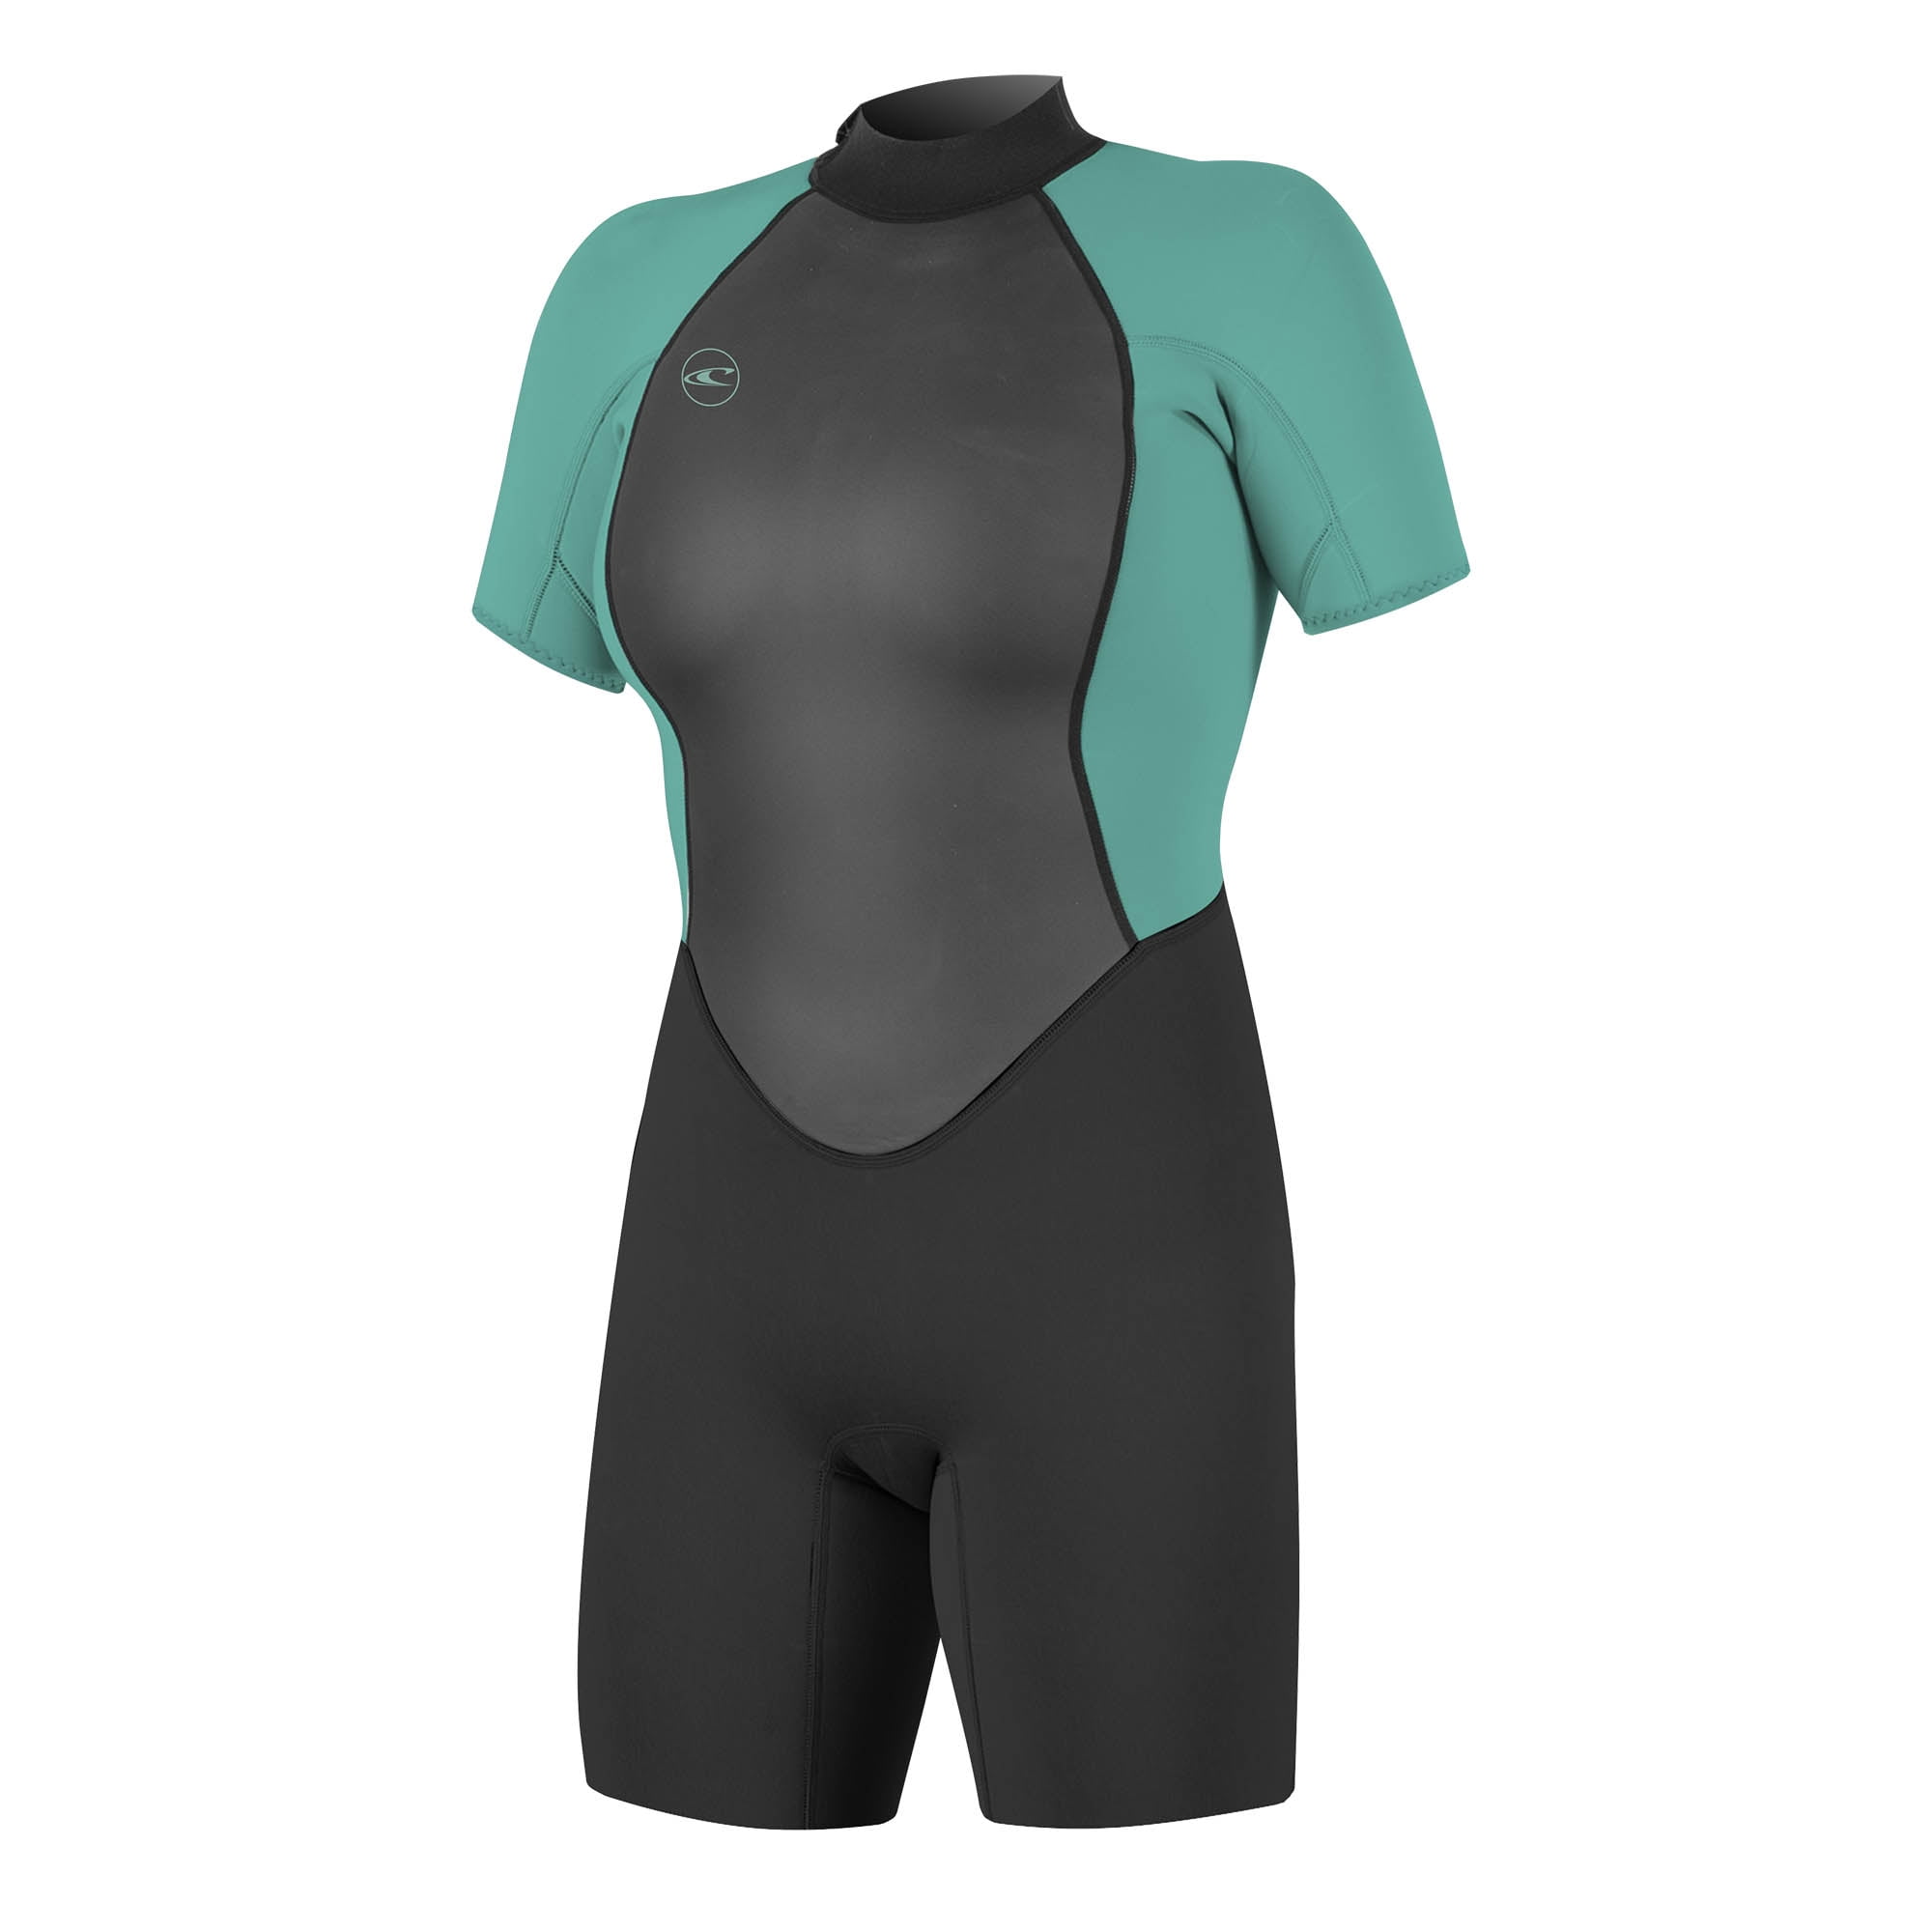 Details about   3/2mm Men's O'Neill EPIC Full Wetsuit 